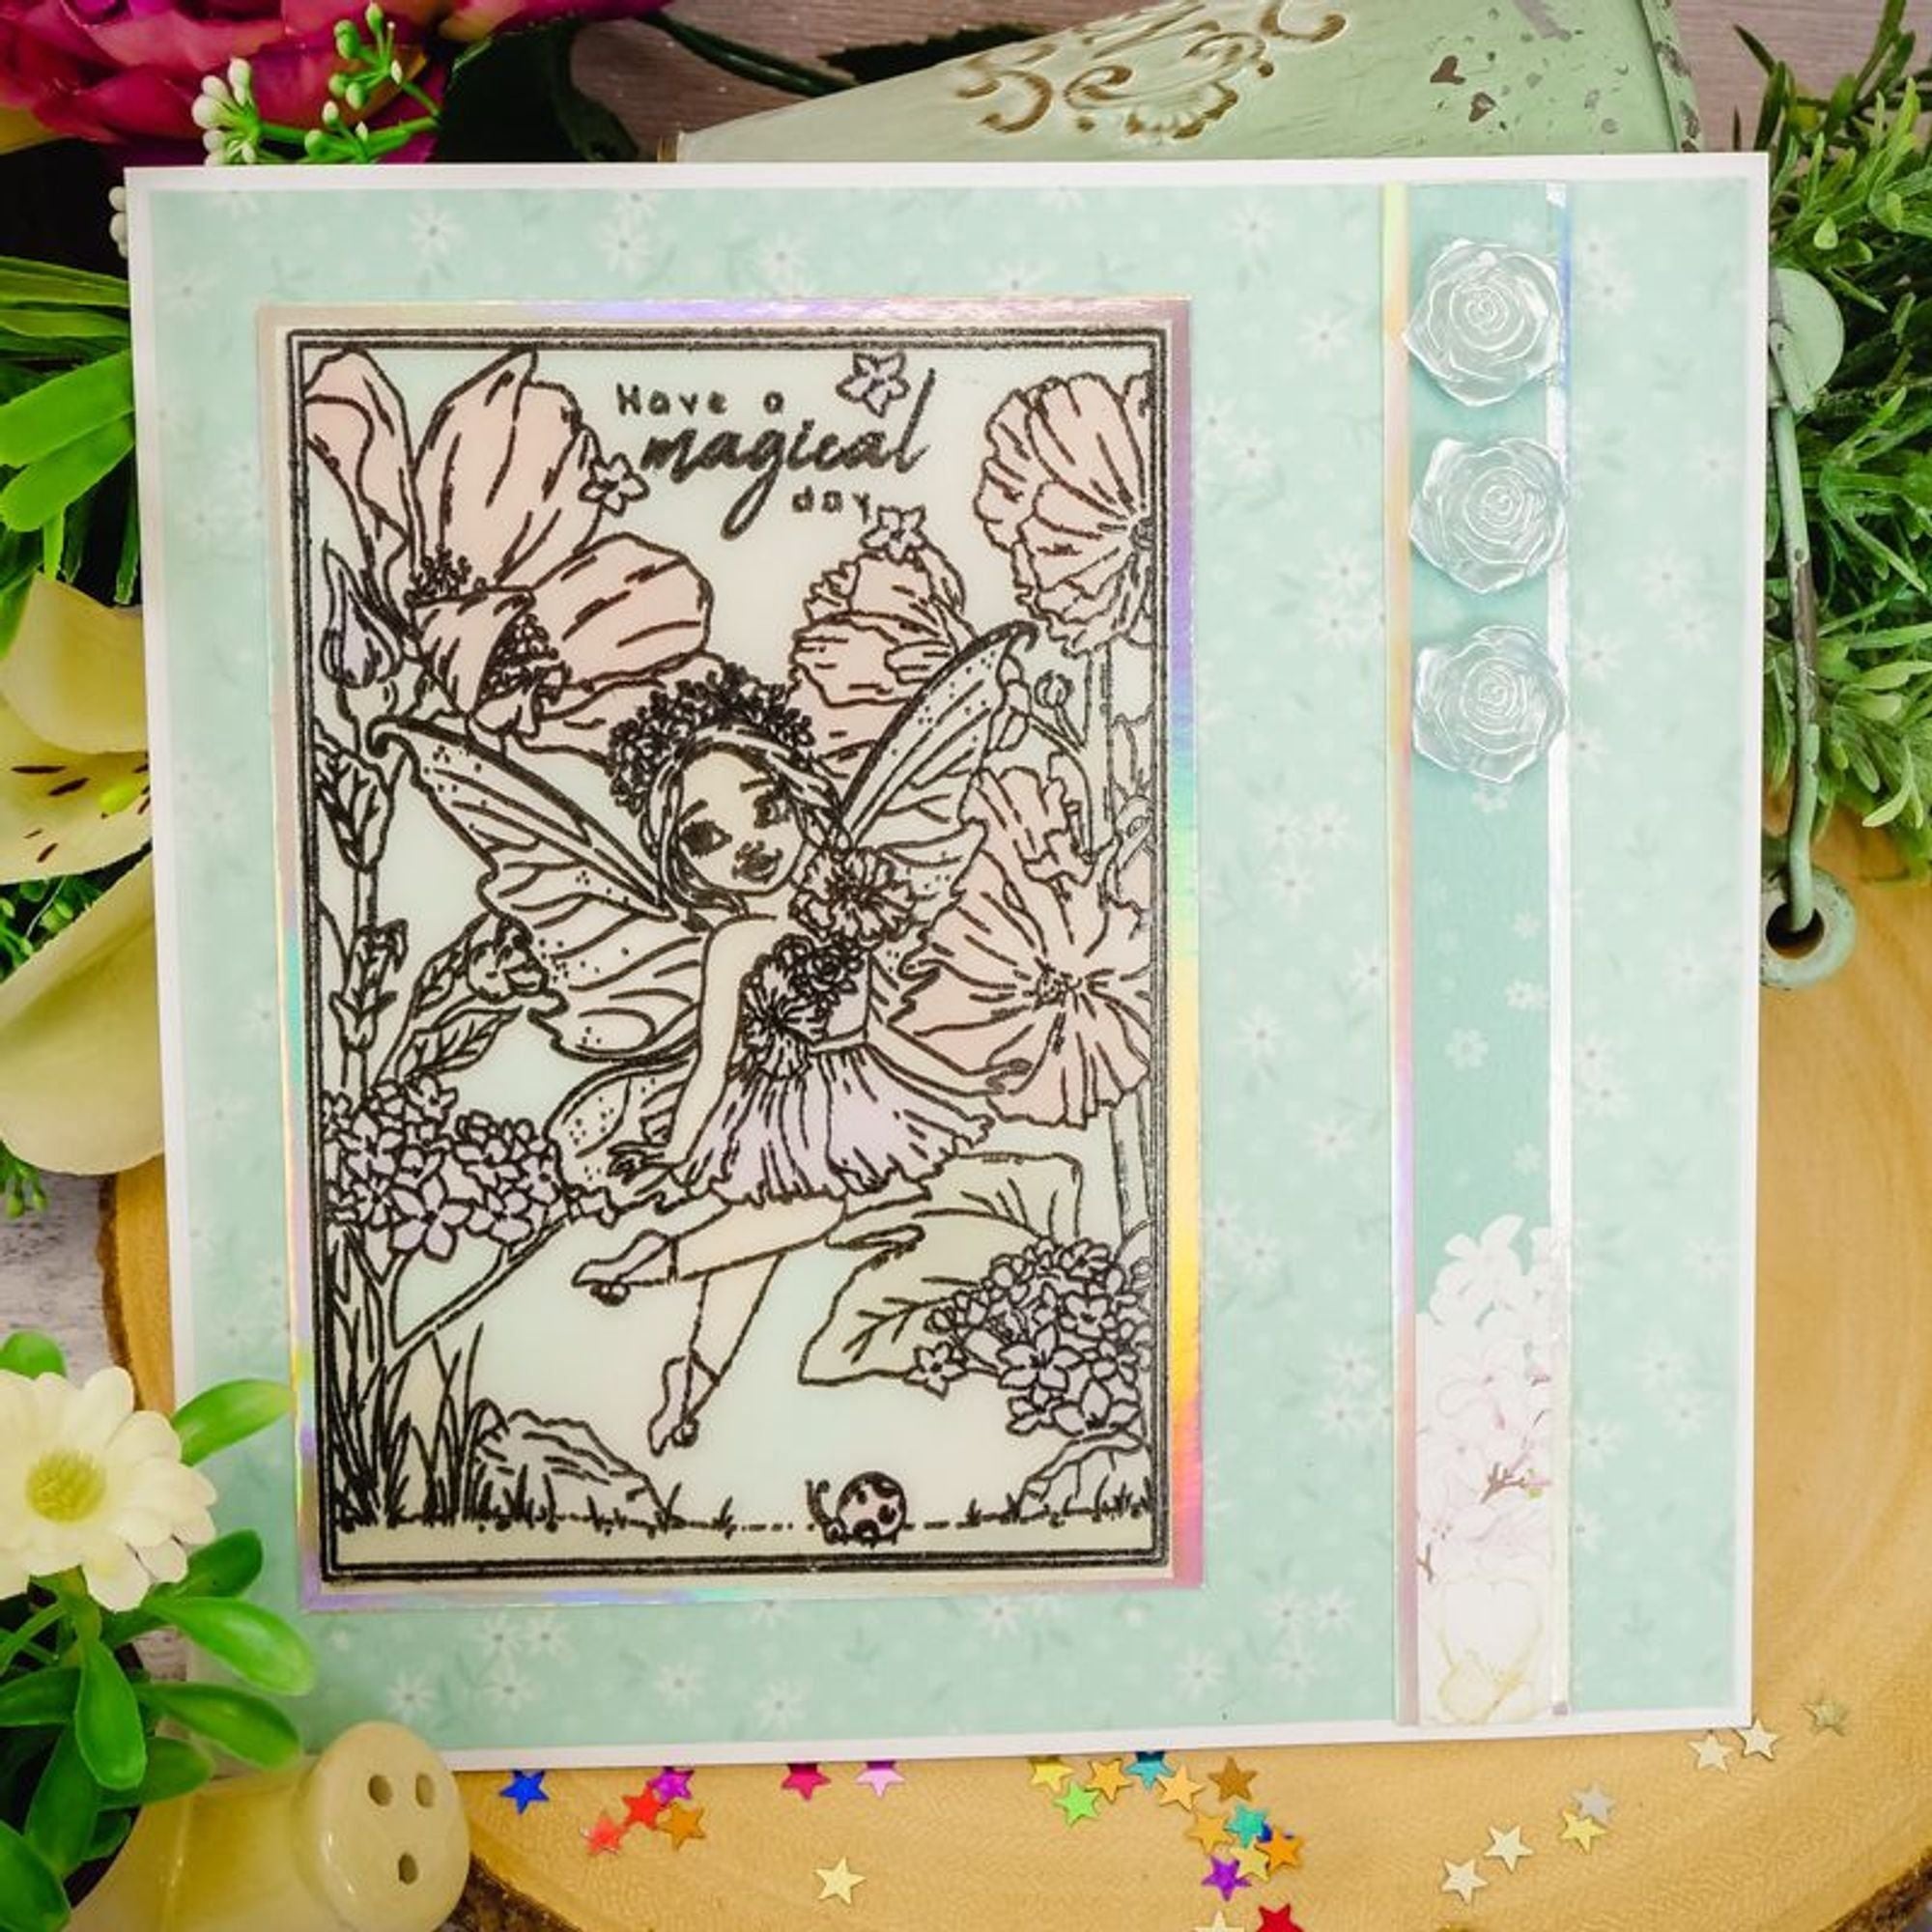 For The Love Of Stamps - Fairy Magic A6 Stamp Set